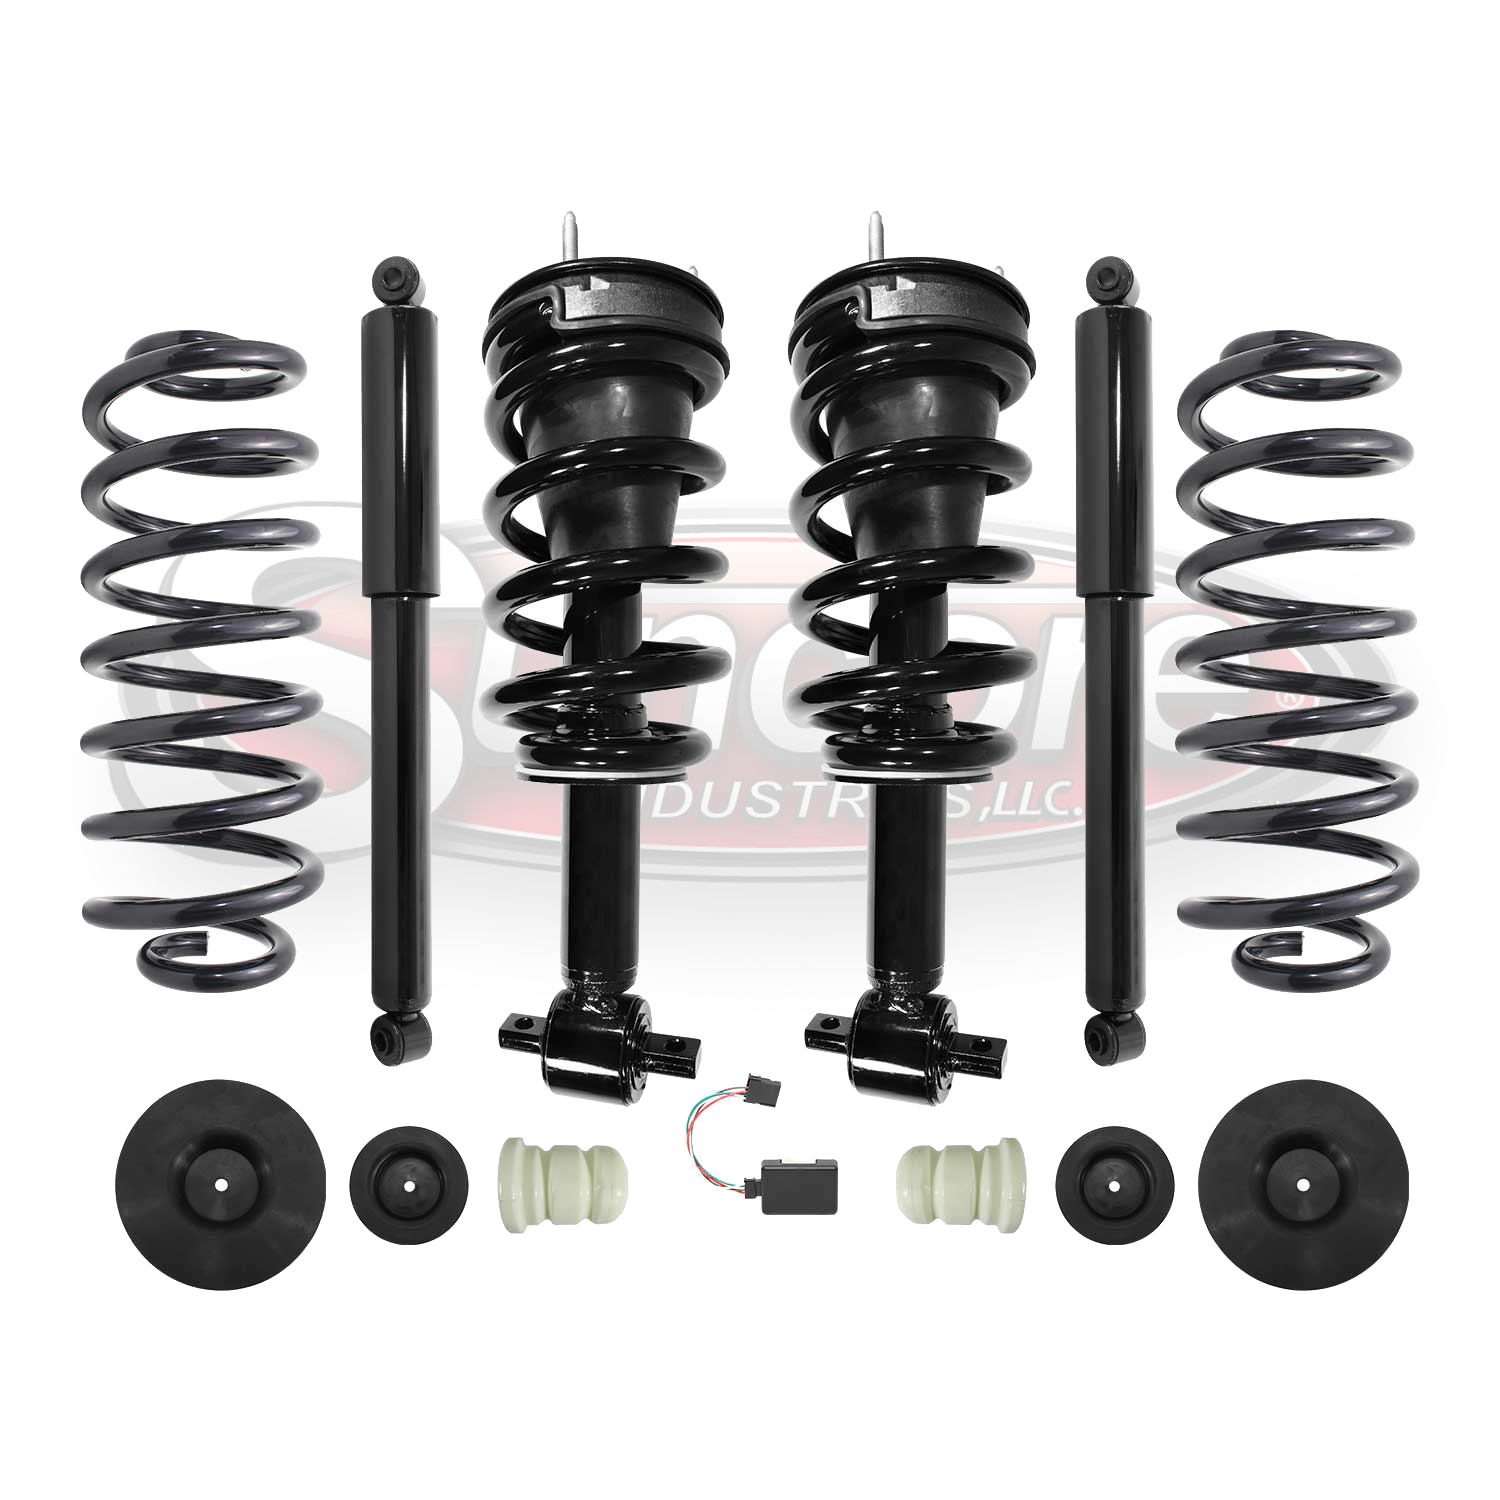 Air to Complete Strut & Shock Conversion Kit - 2007-2014 Cadillac Chevy GMC LWB